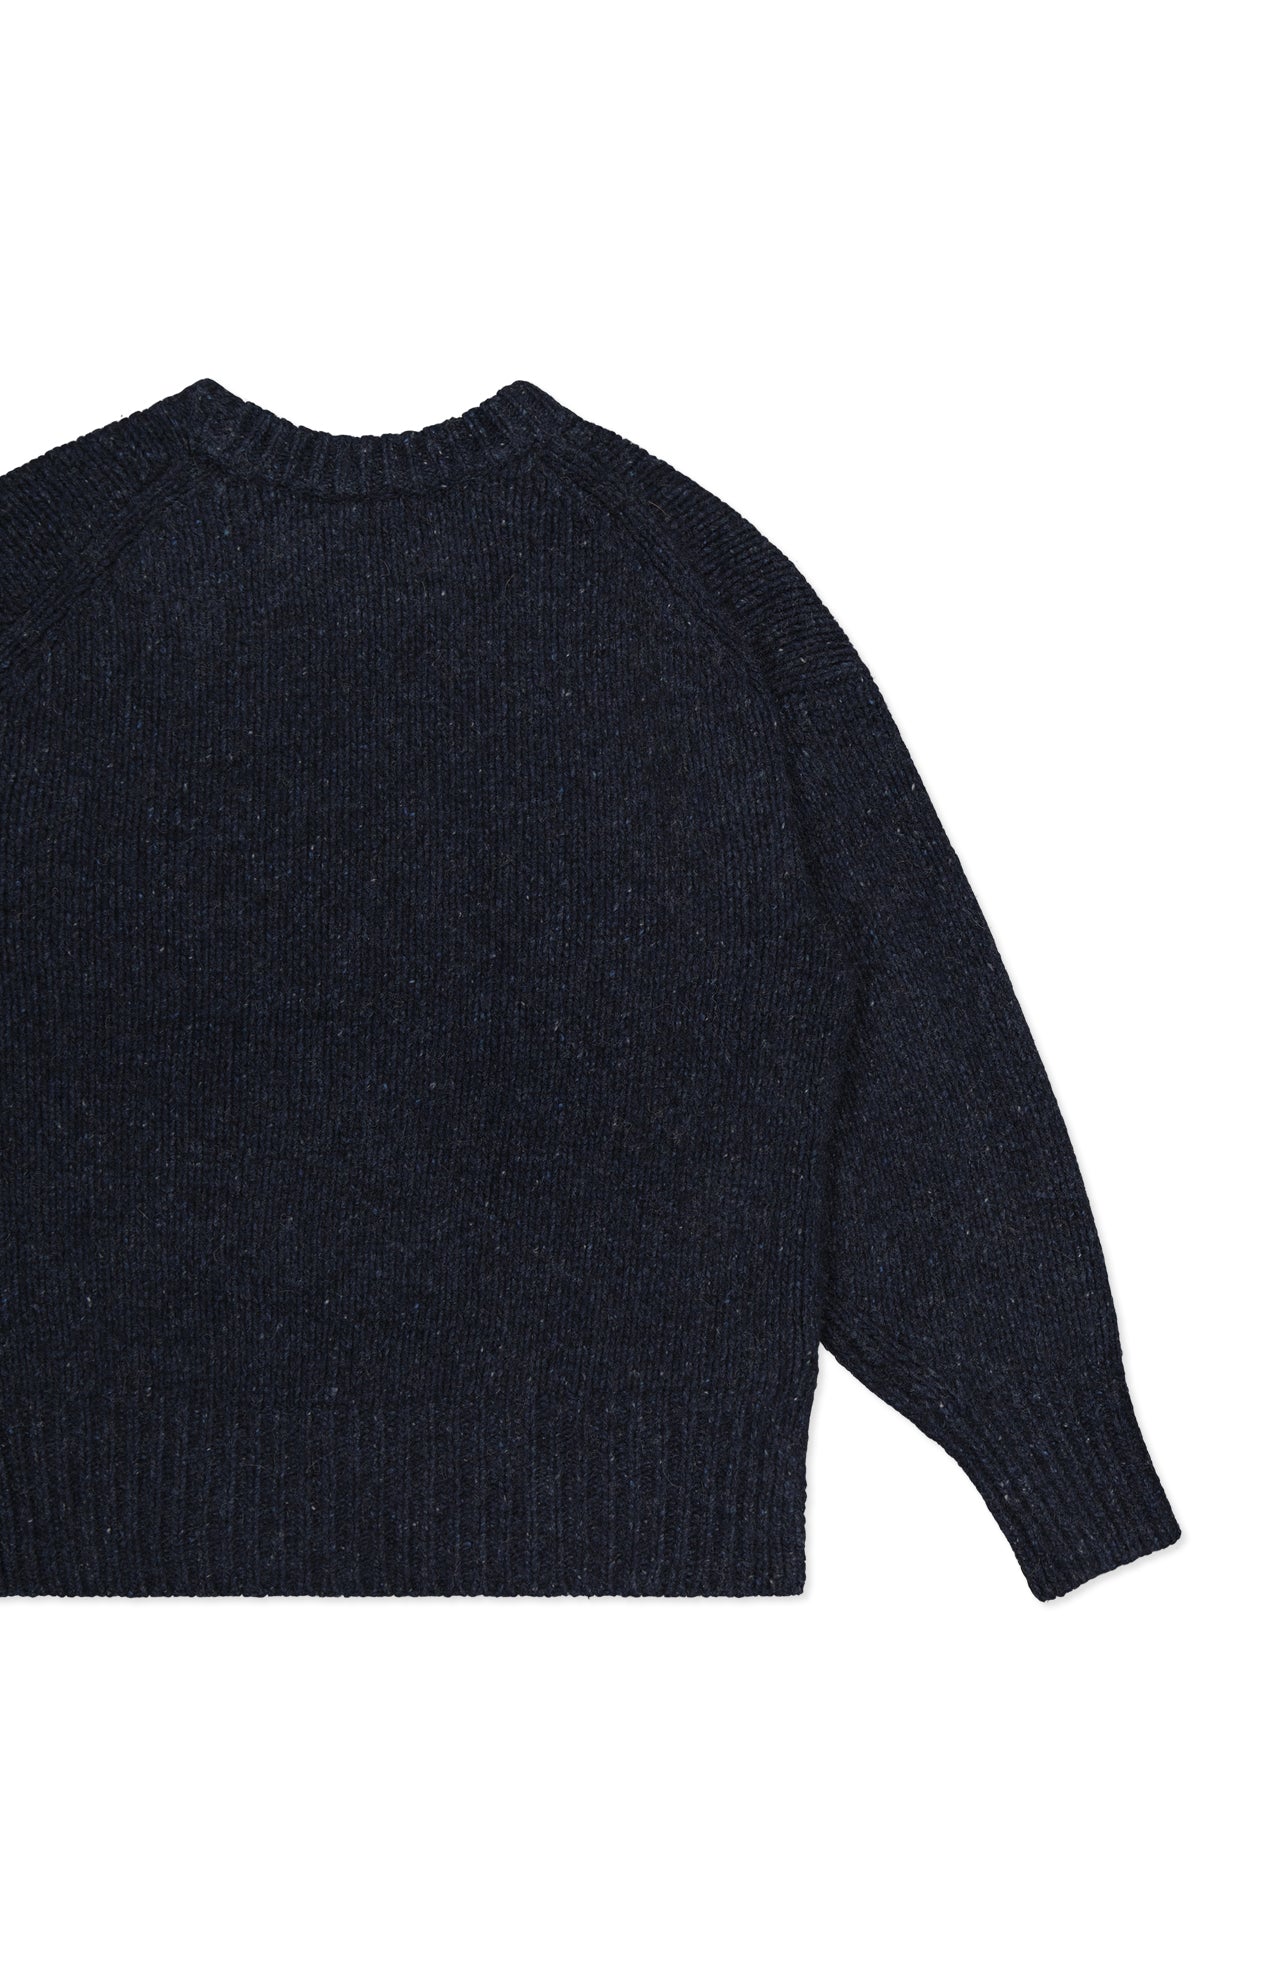 Donegal Cashmere Luxe Crewneck (7254356689011)